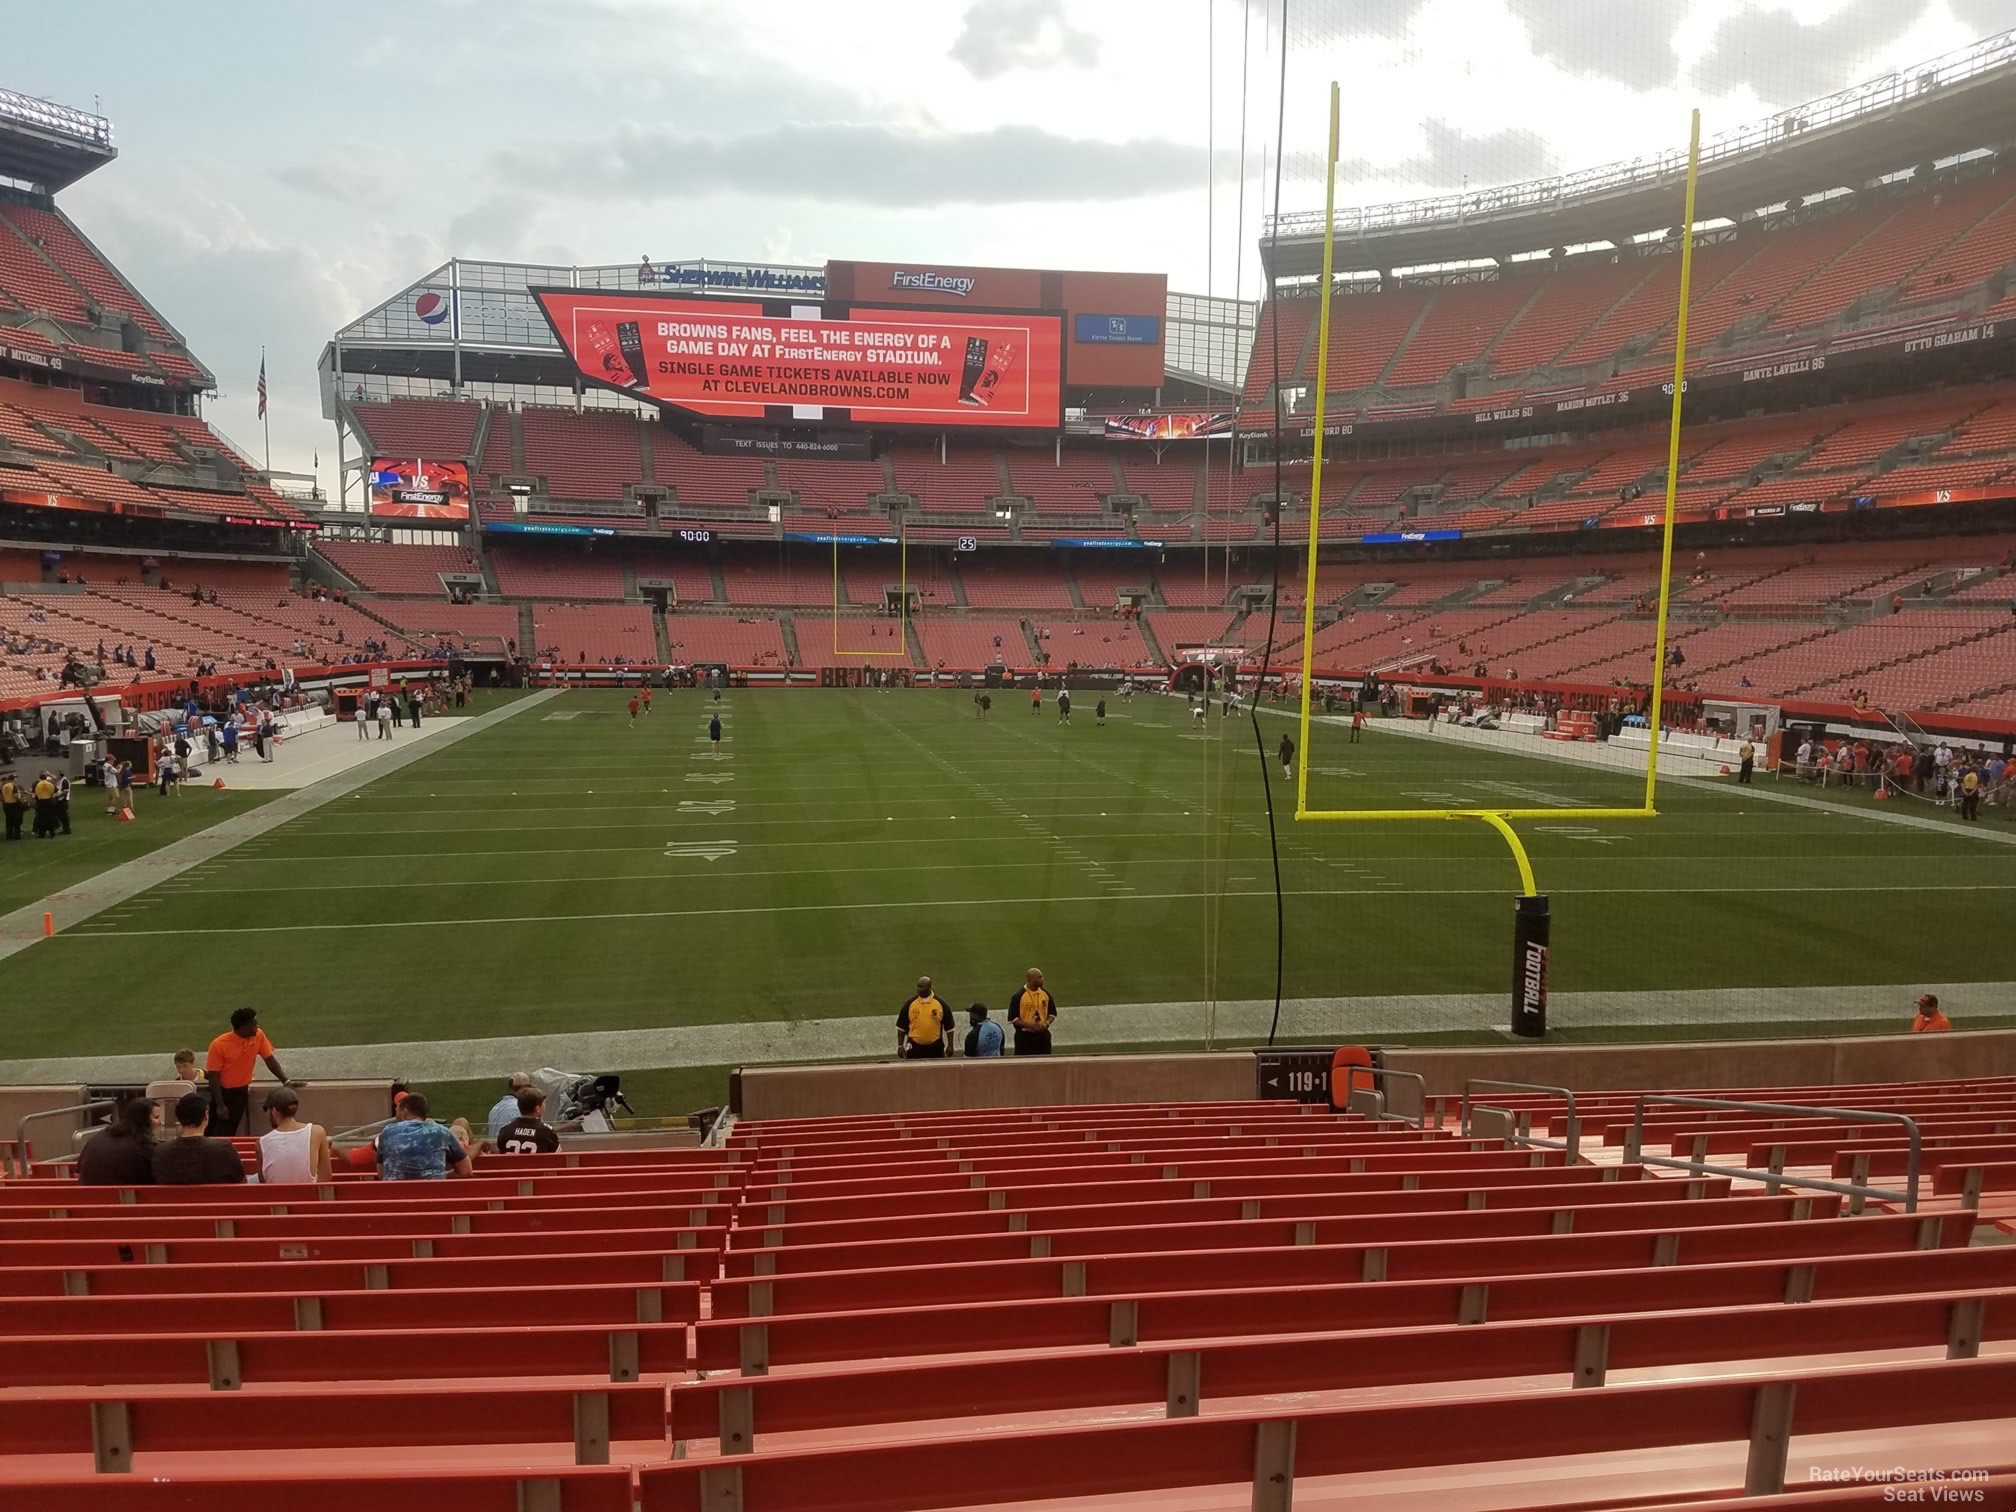 section 119, row 17 seat view  - cleveland browns stadium